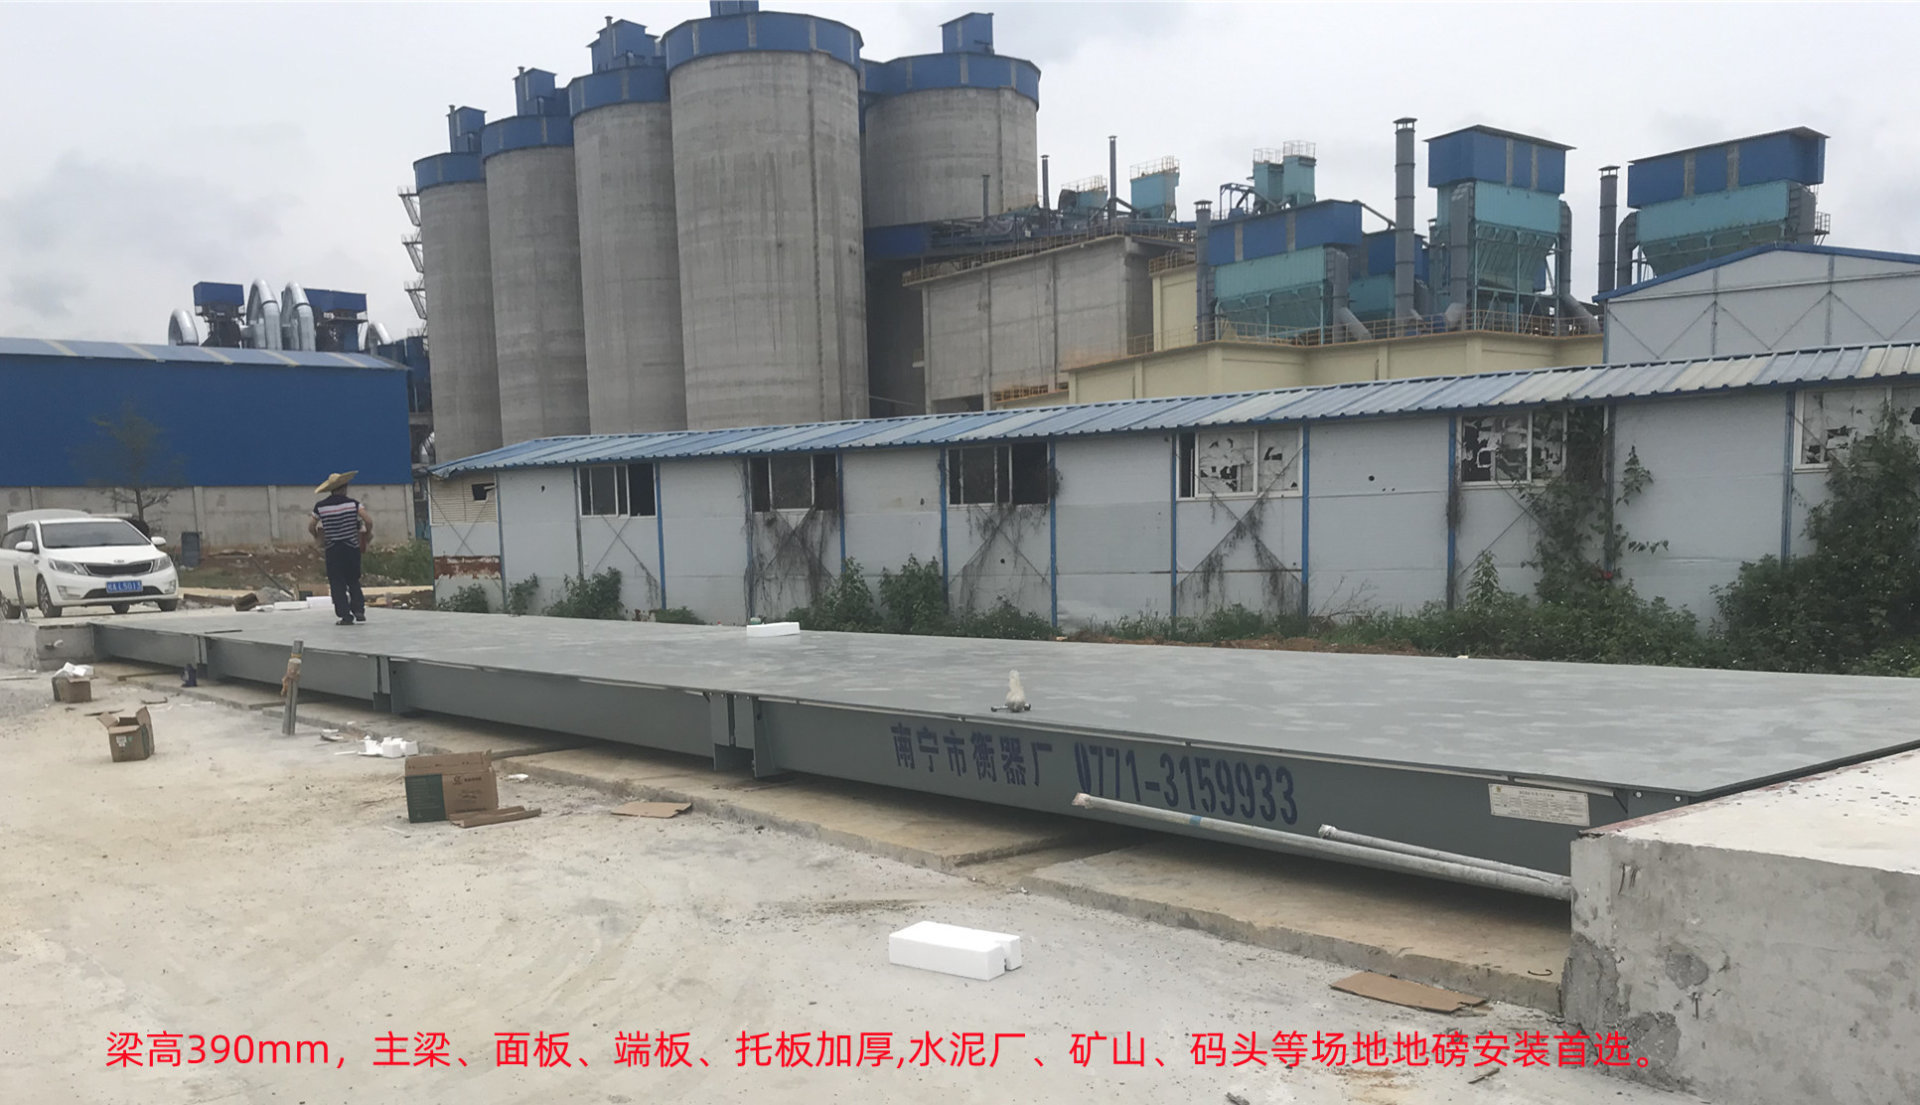 Installation site of Guangxi Huahong Cement Co., Ltd